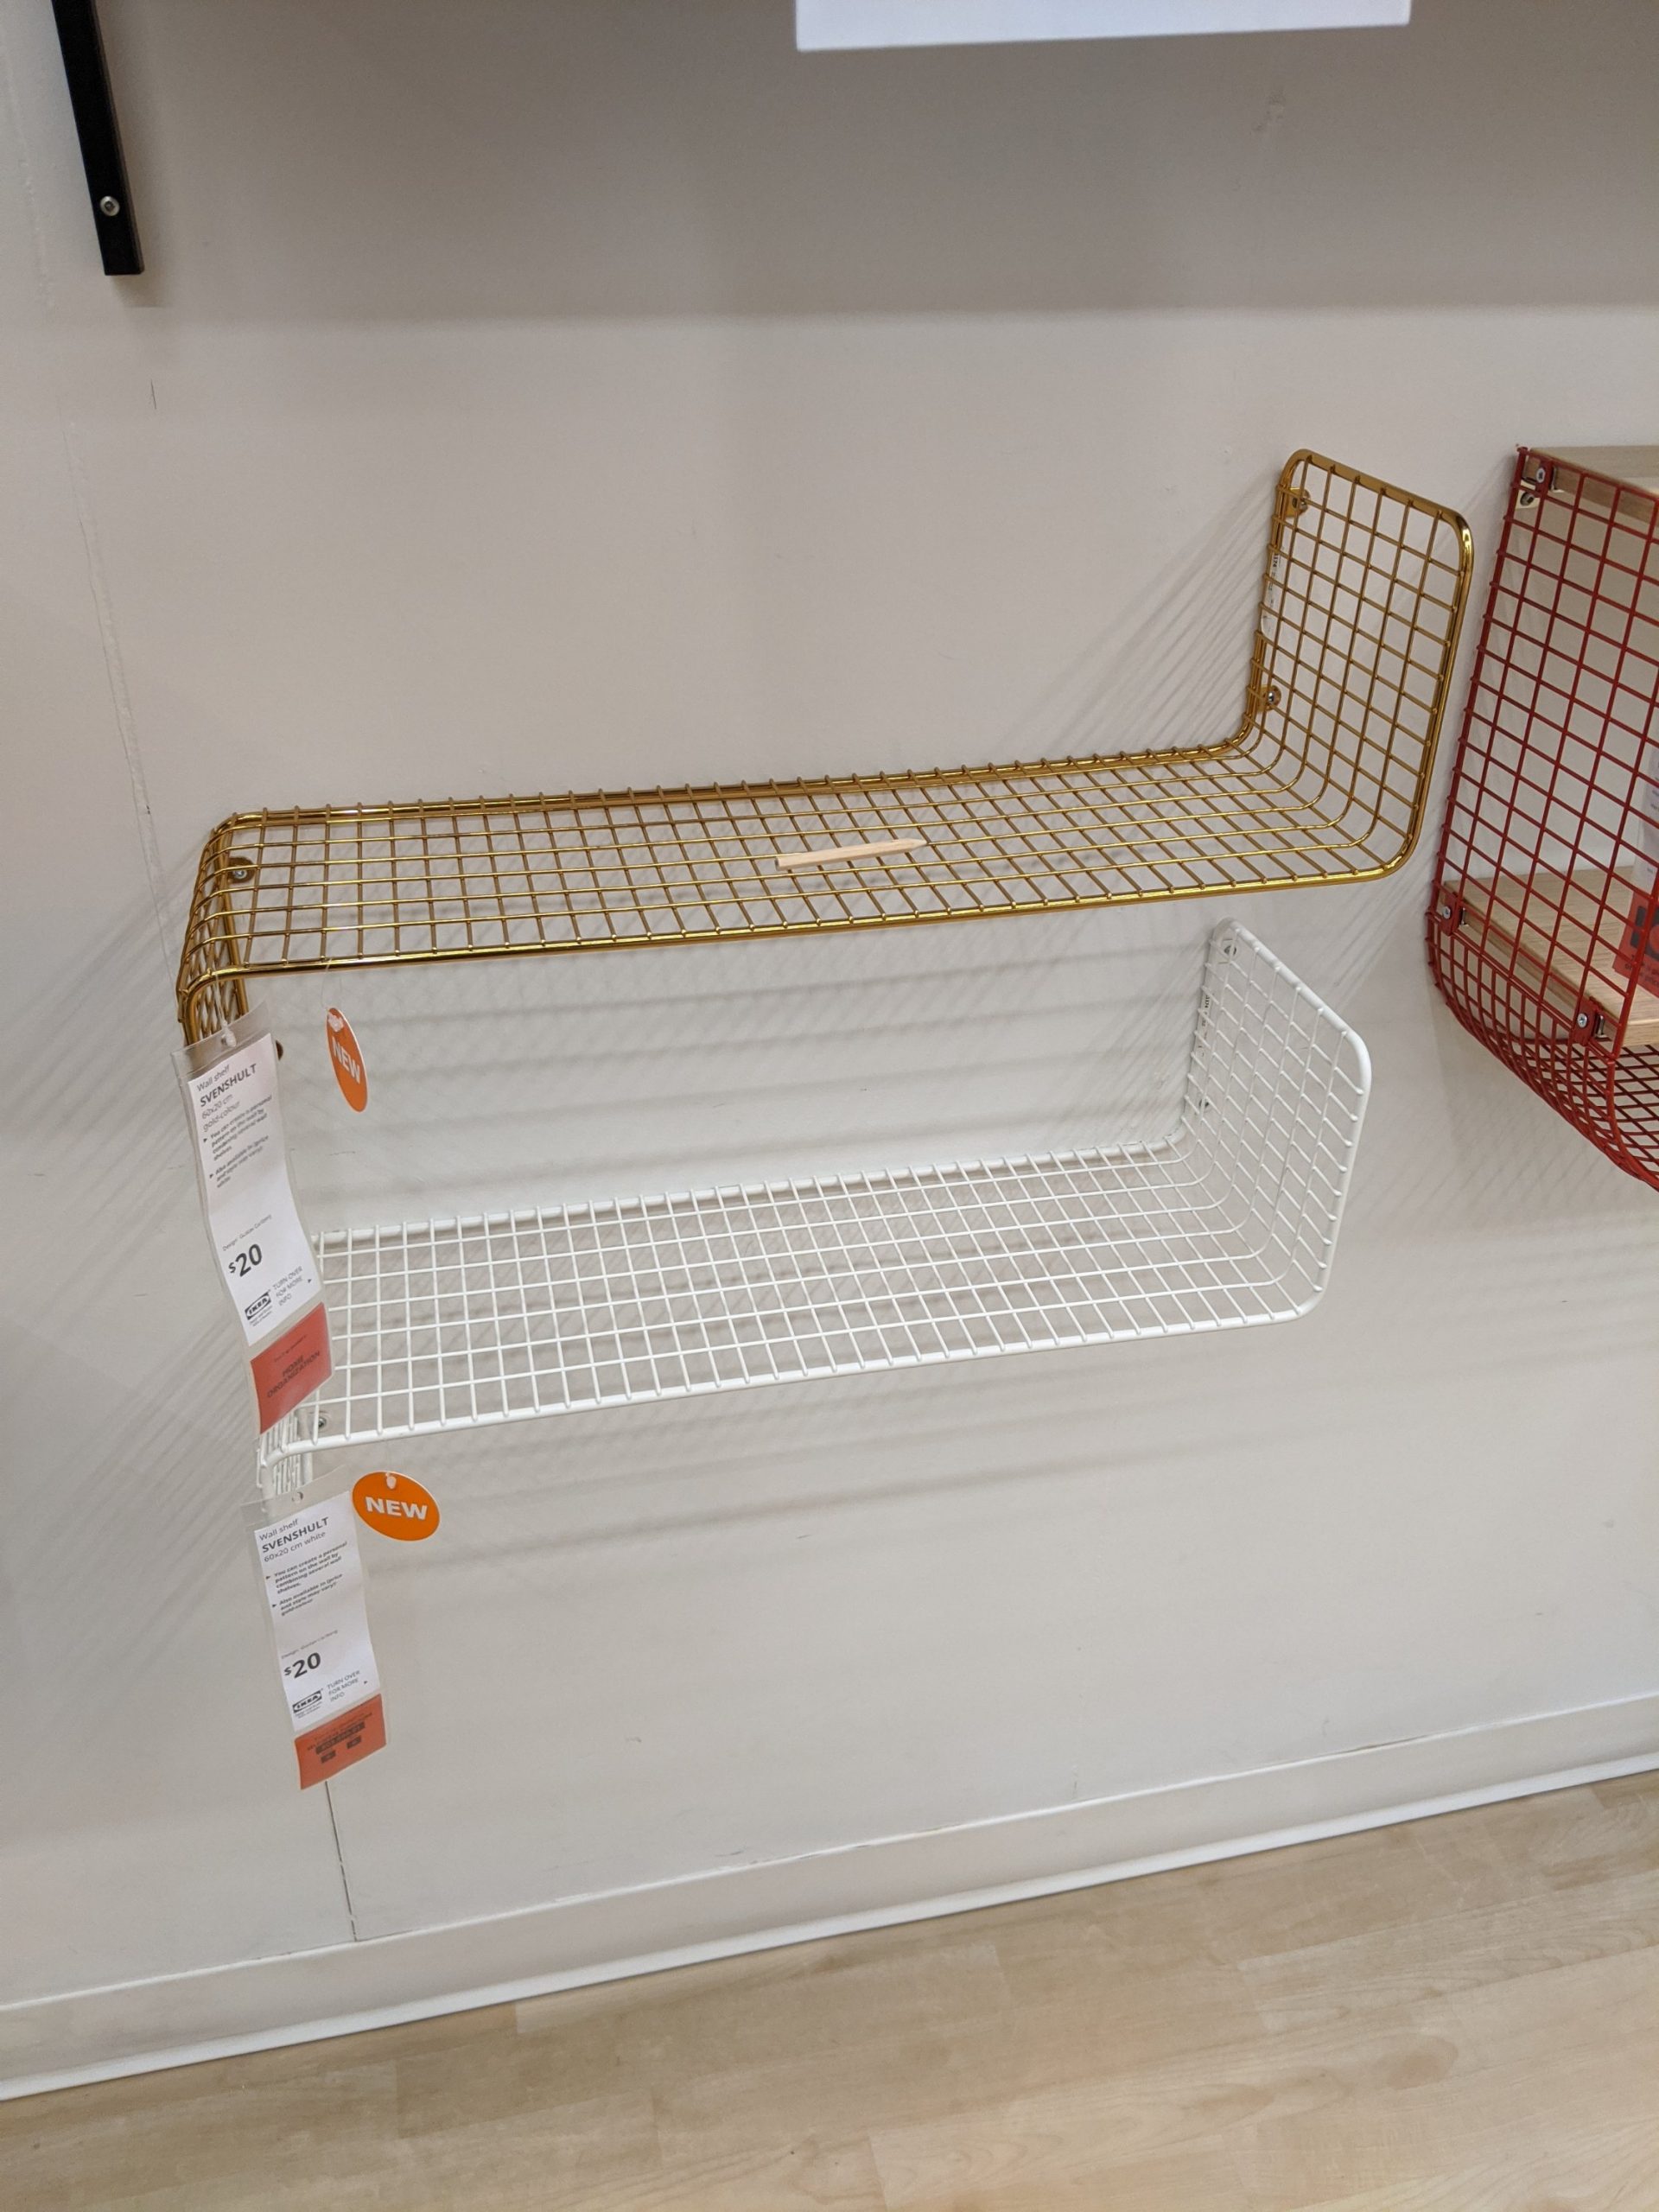 New products I saw at Ikea today! - Save Money in Winnipeg